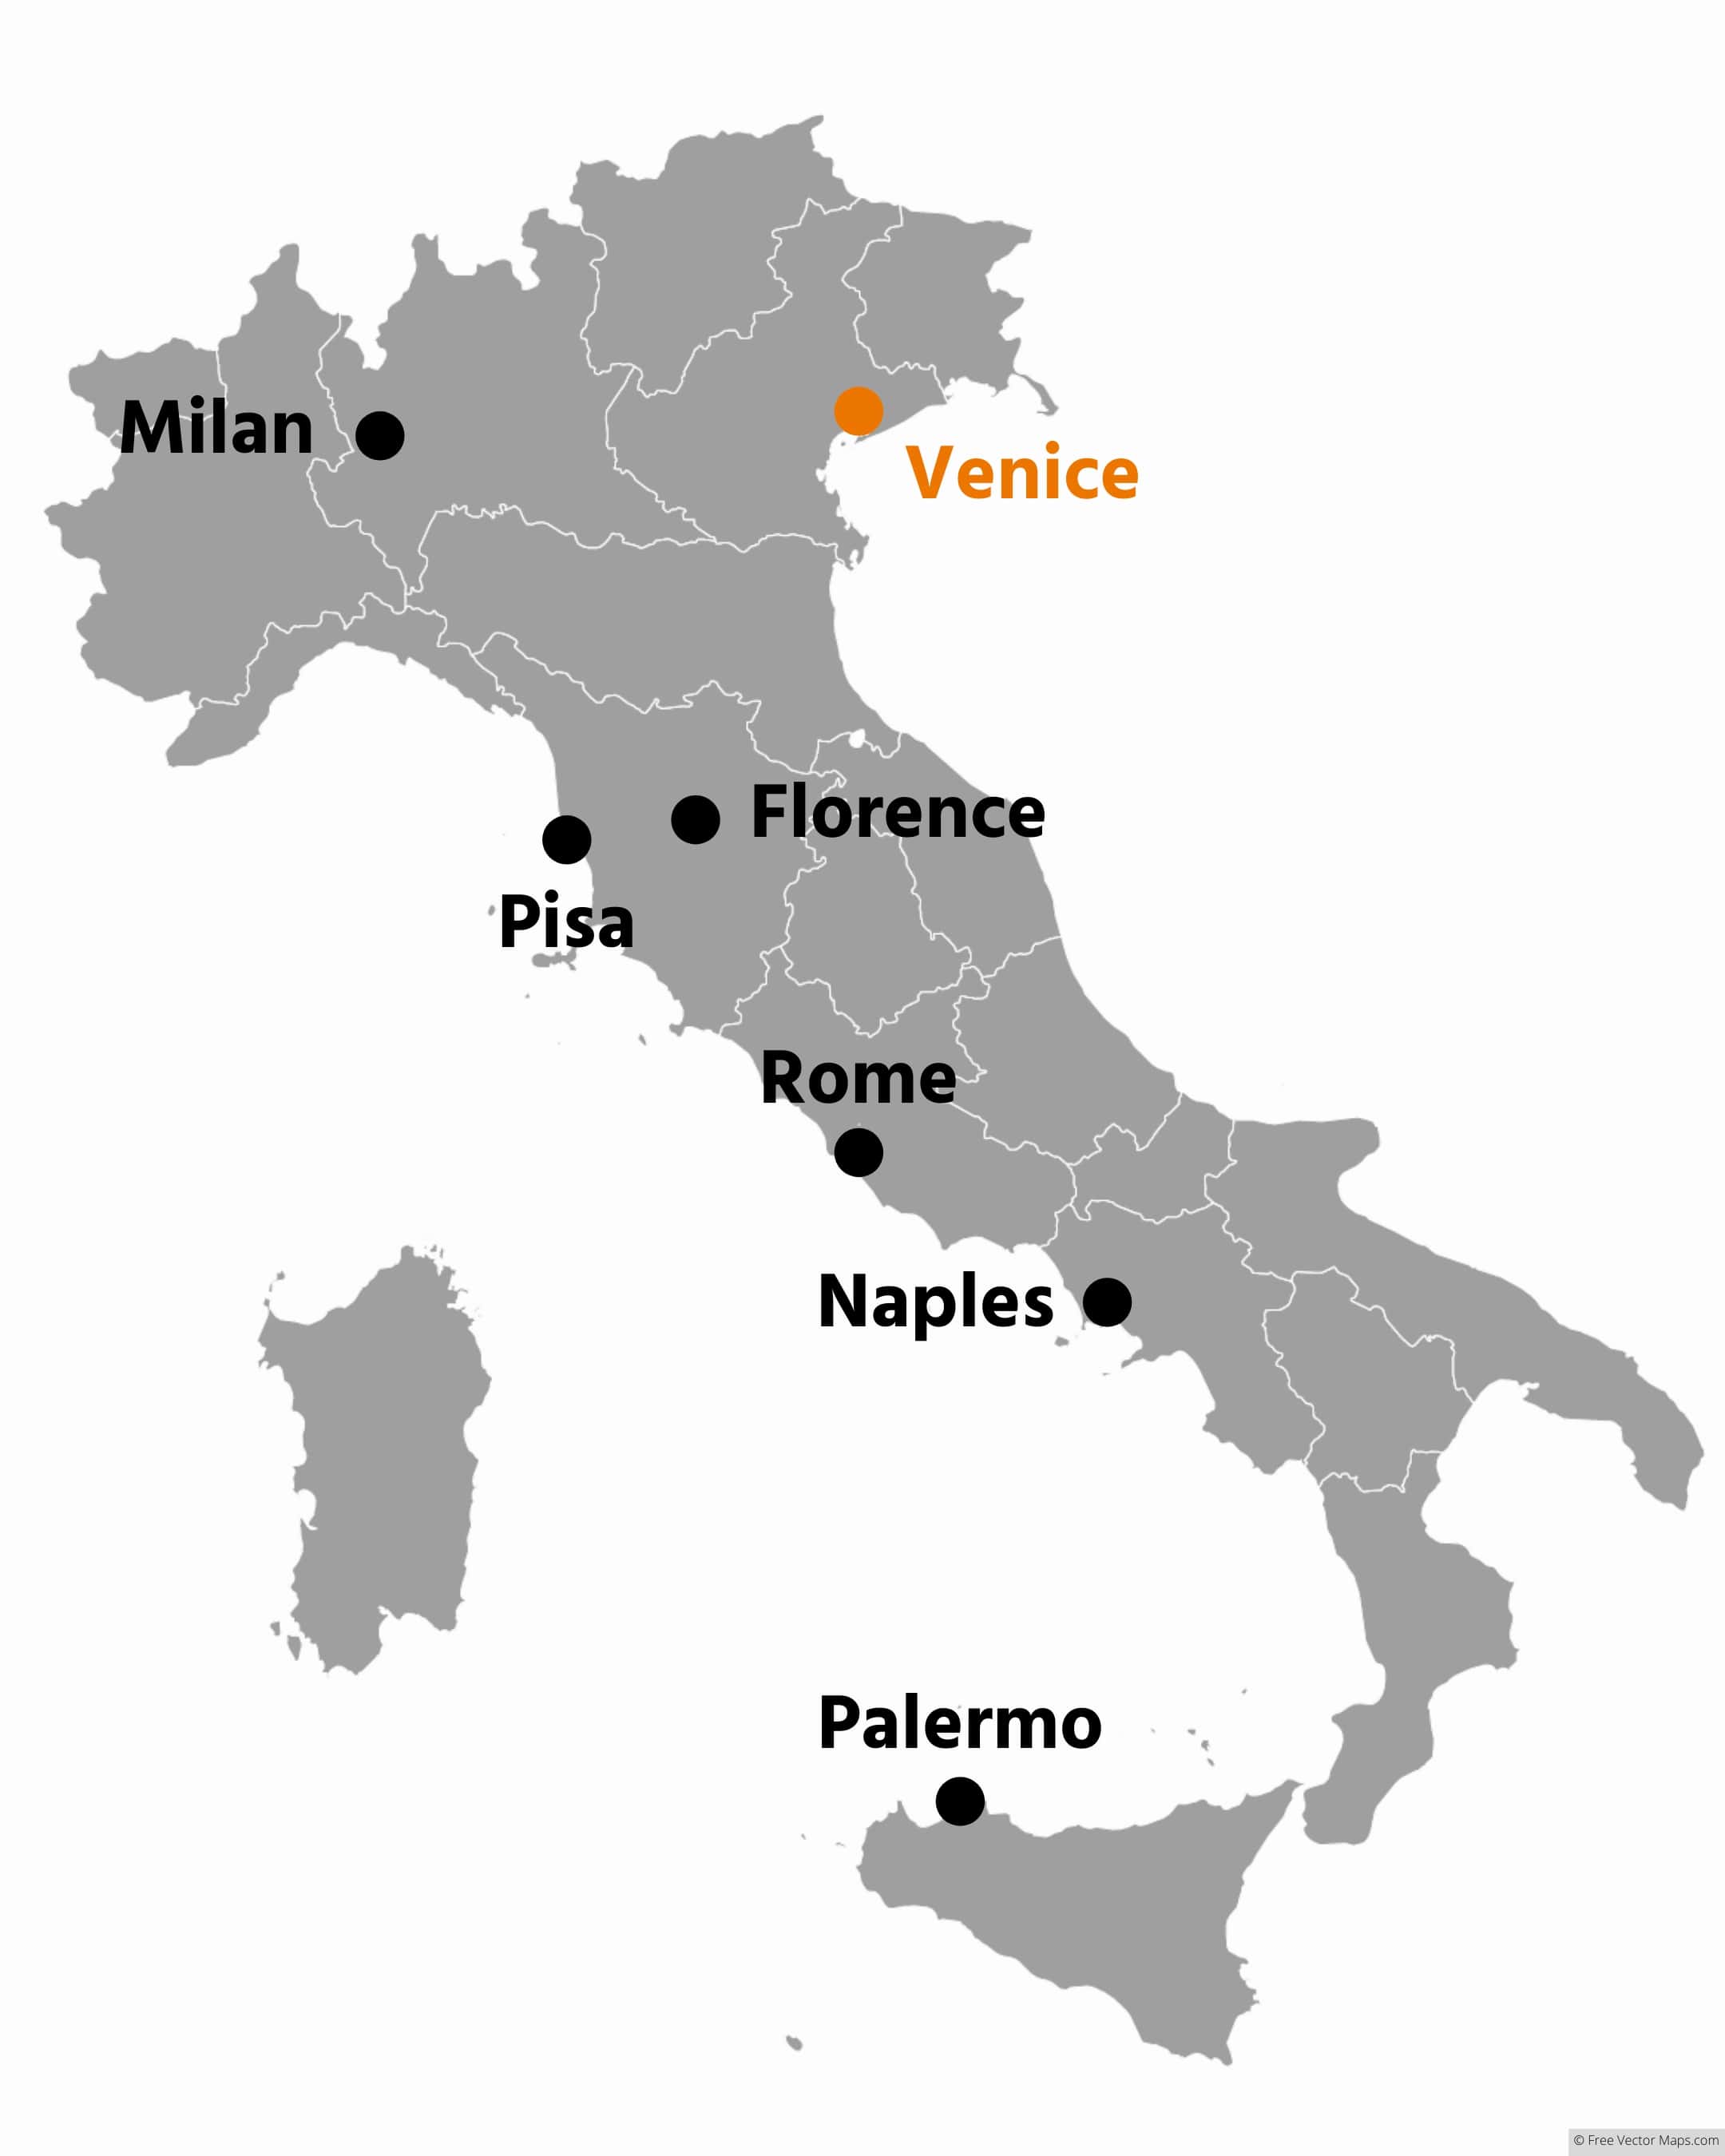 venice on the map of italy